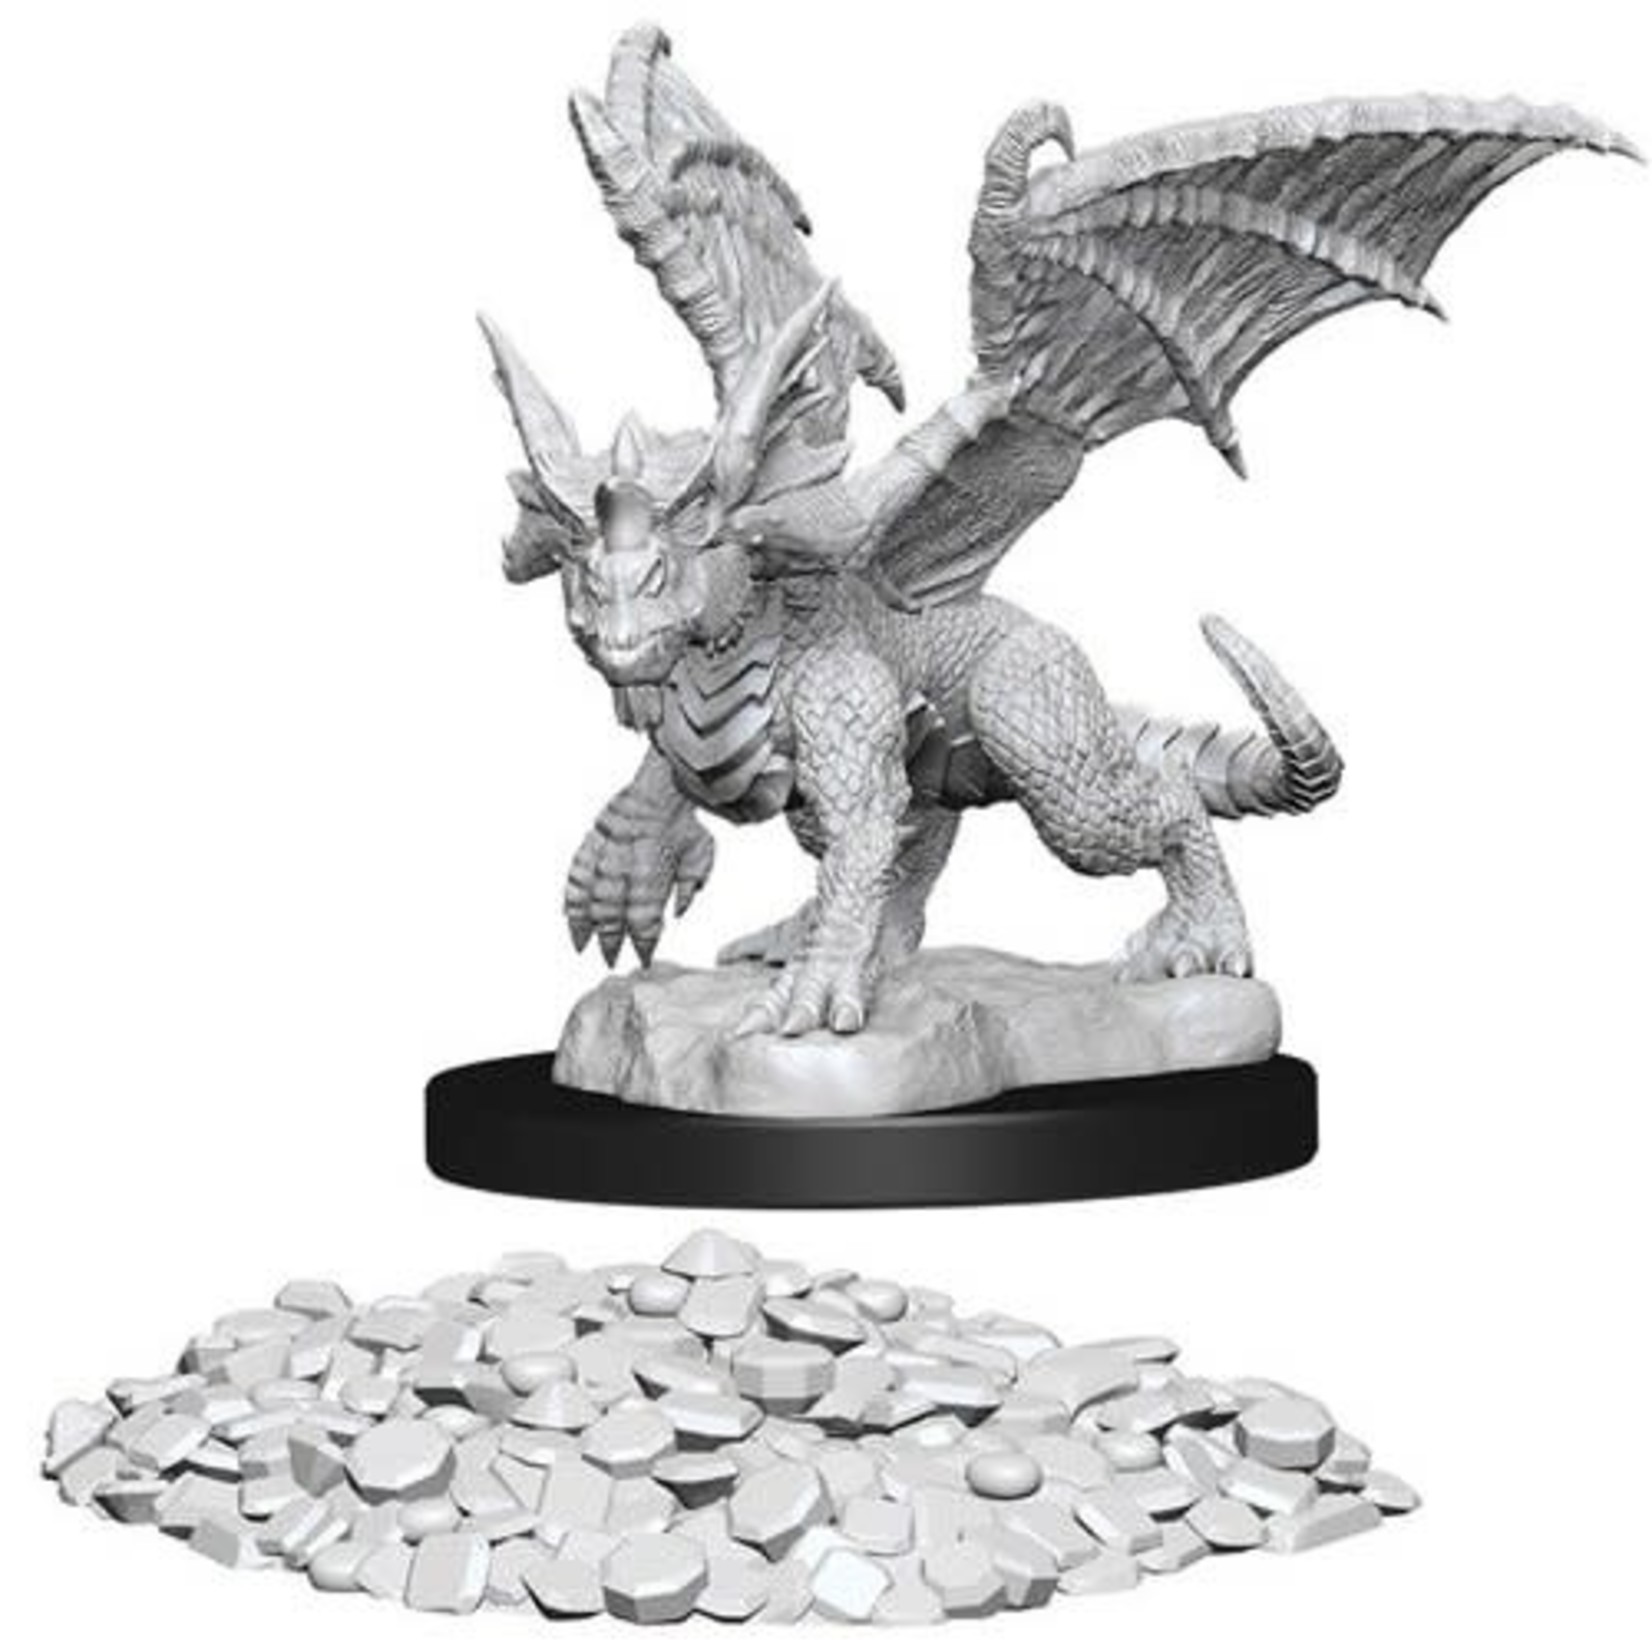 WizKids Dungeons and Dragons Nolzur's Marvelous Minis Blue Dragon Wyrmling